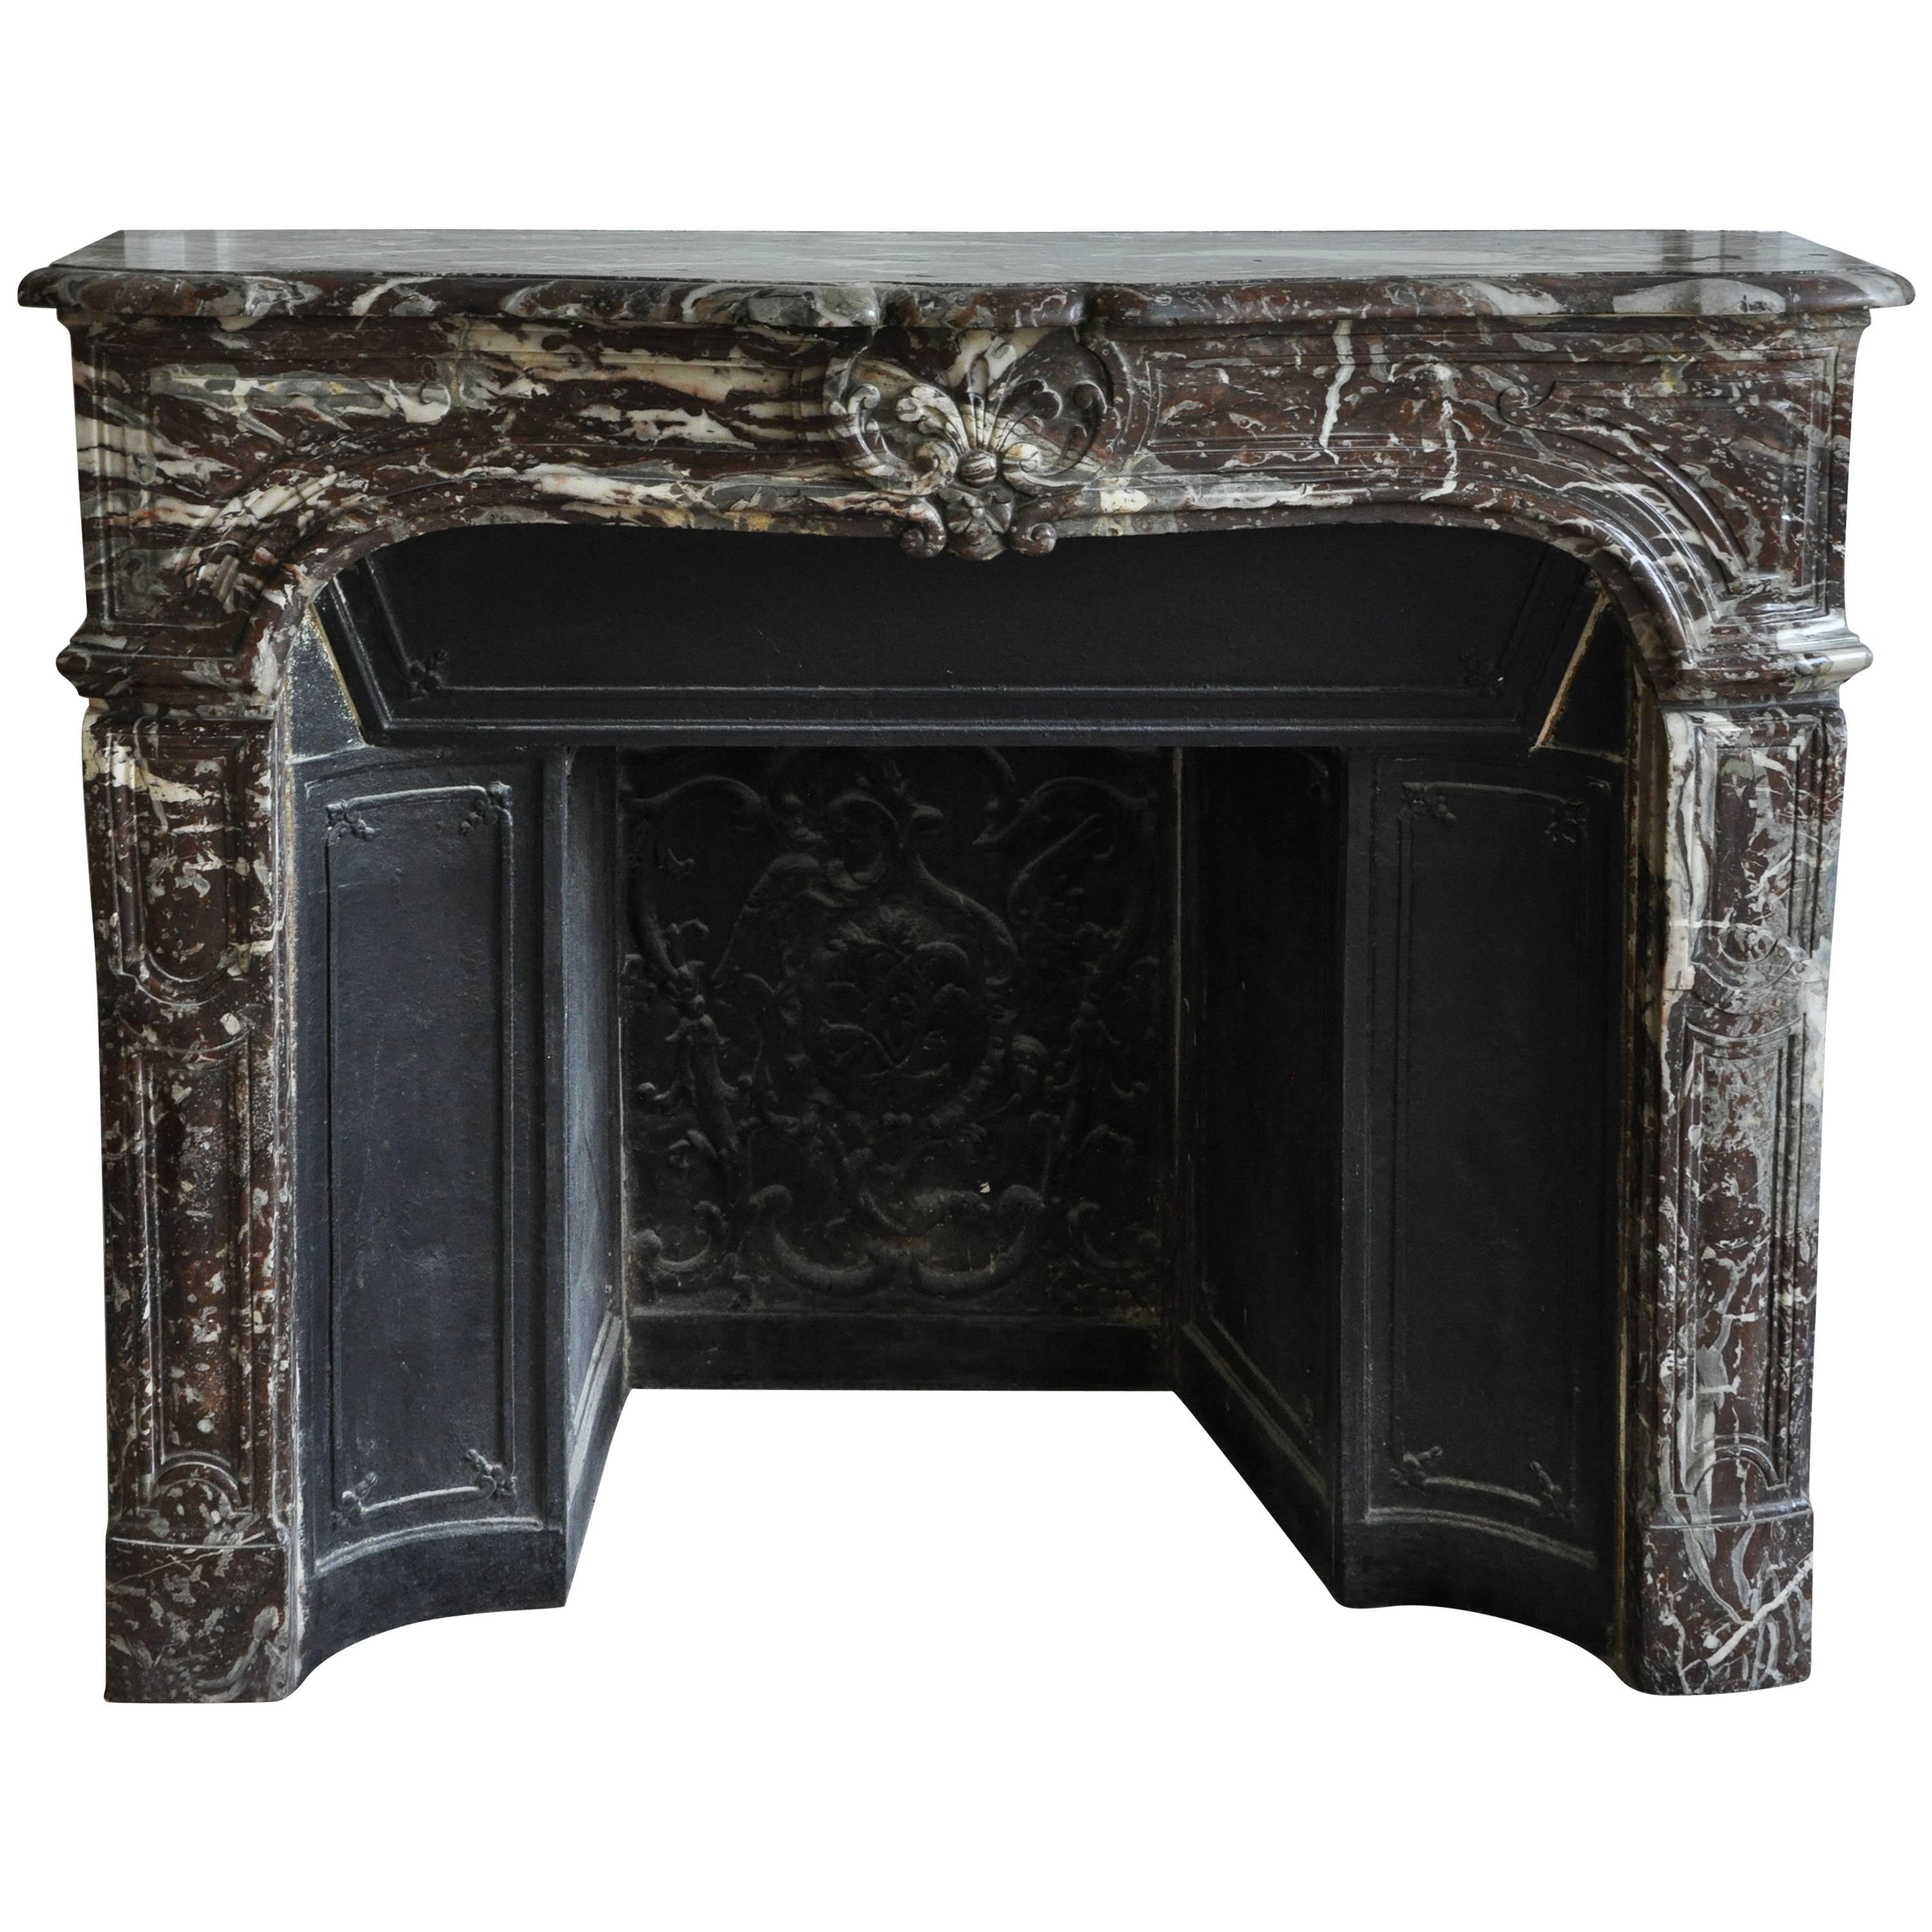 Antique Regence Period Fireplace in Royal Red Marble with its Complete Cast Iron For Sale